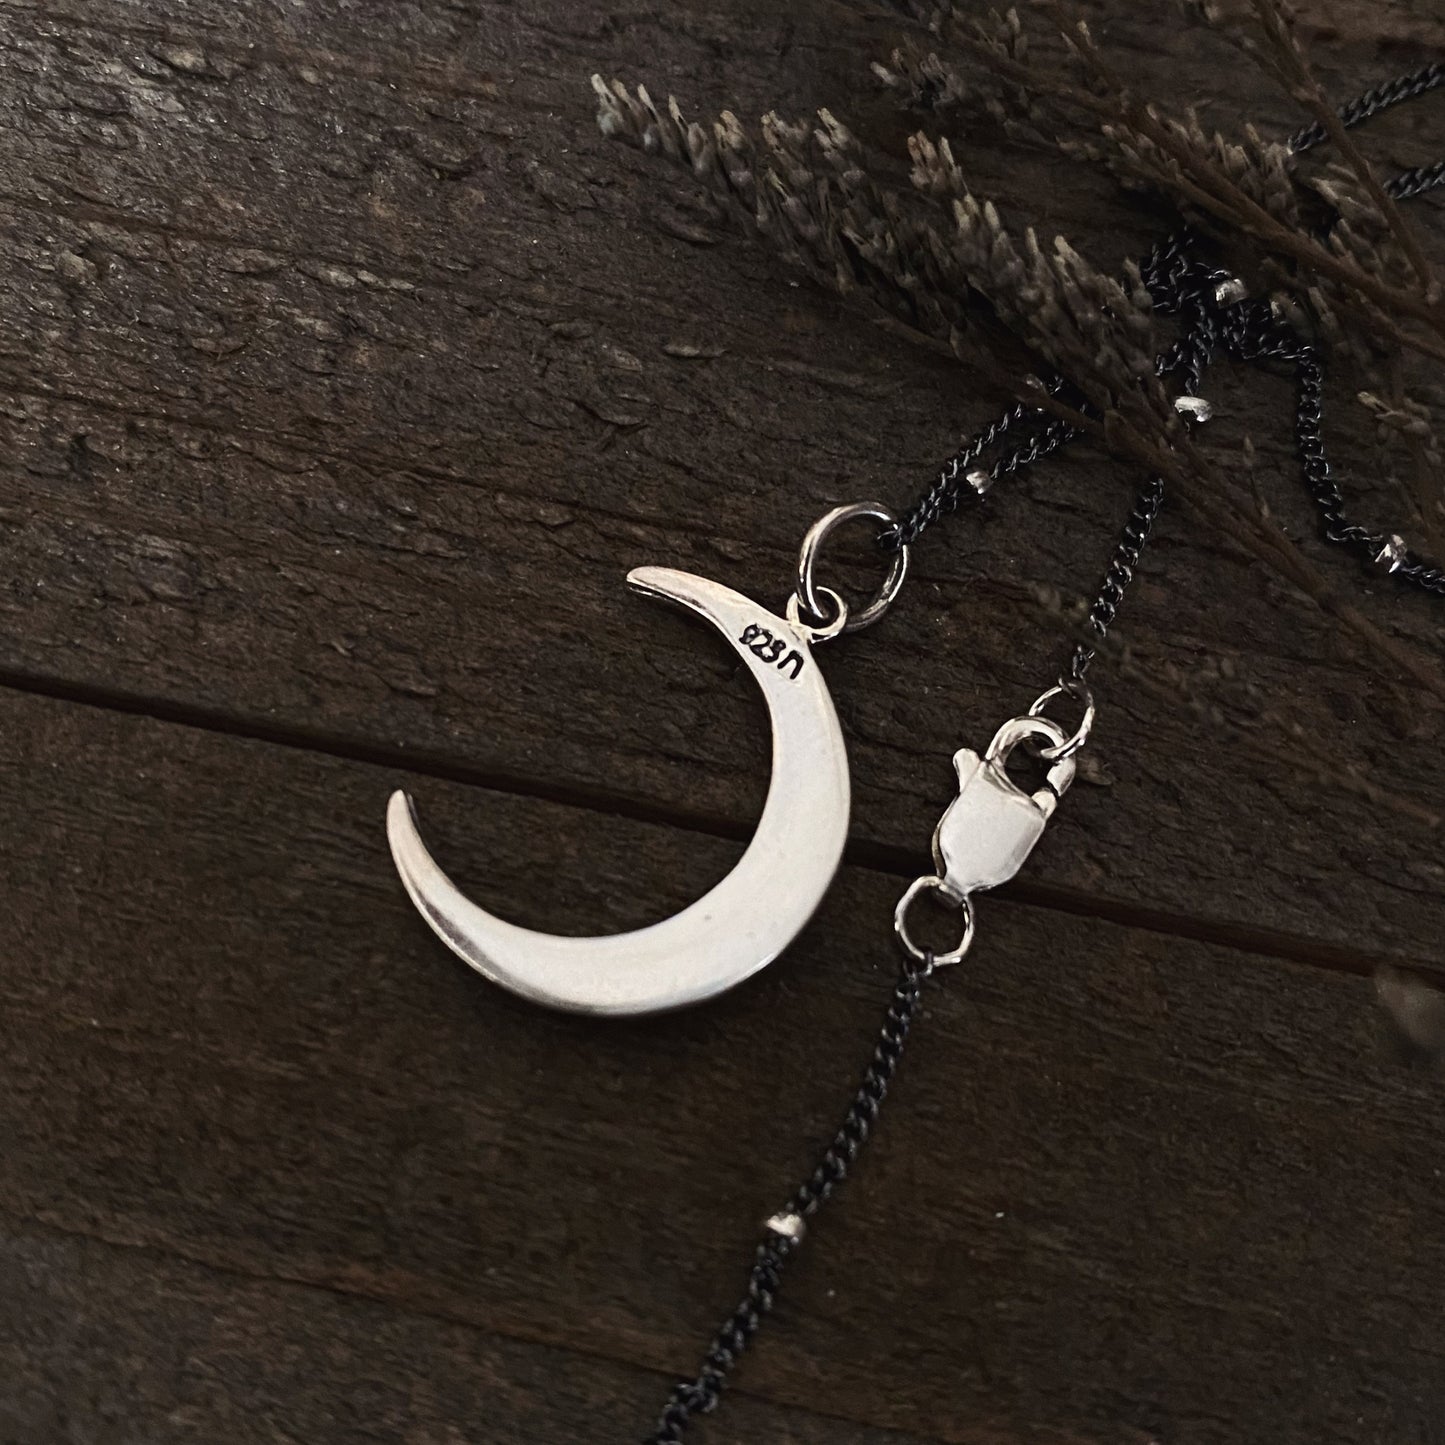 Lunar Guidance Pendant ✦ Light in the Darkness Mini Collection